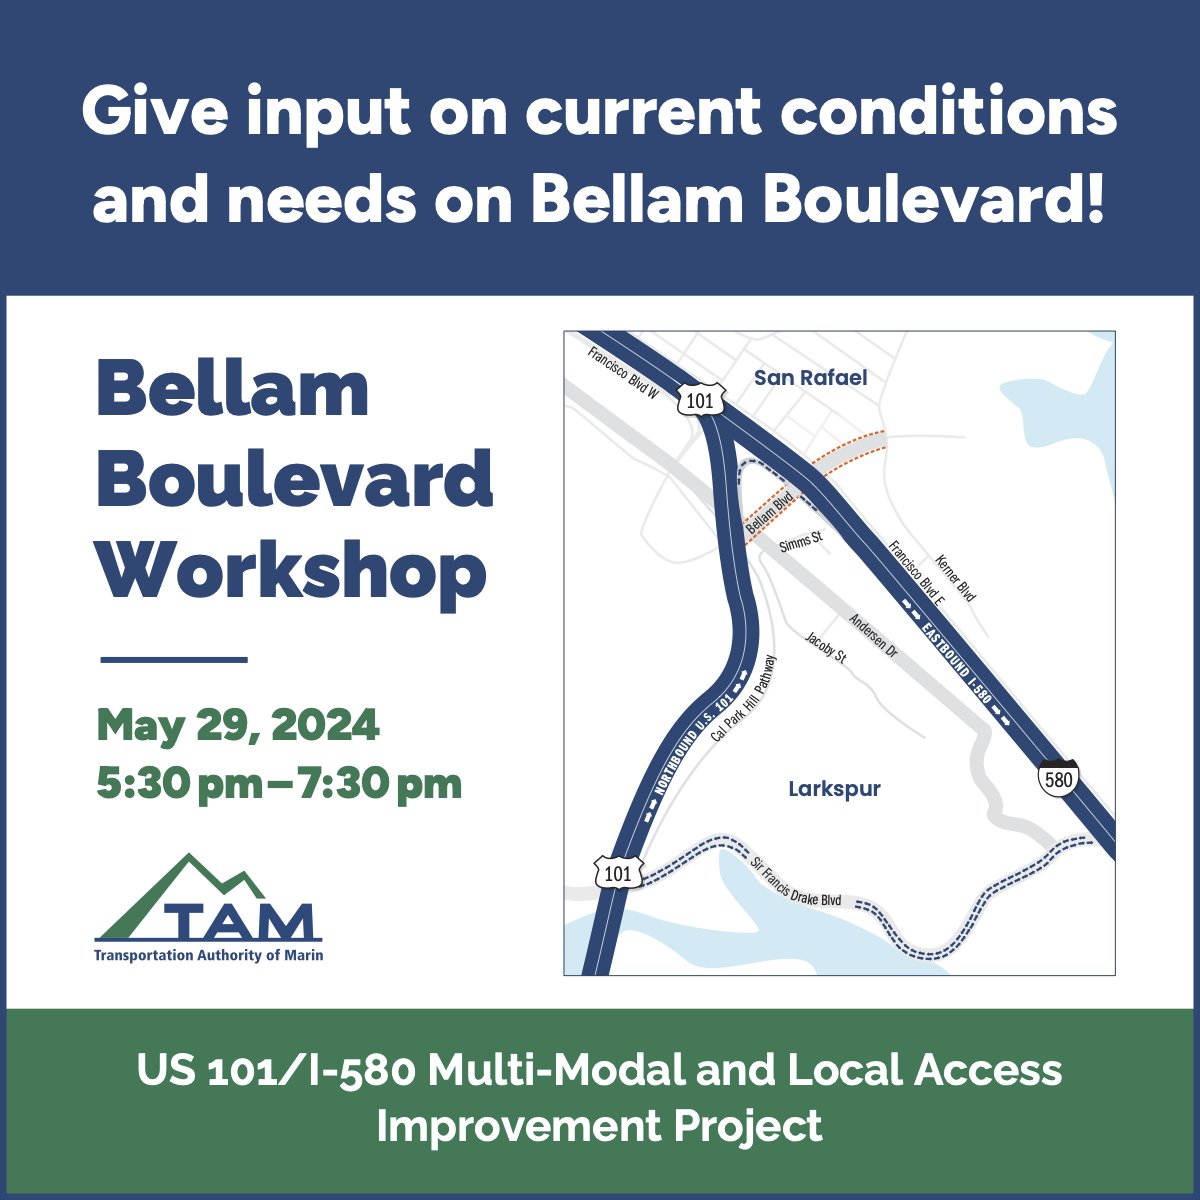 Reminder! TAM’s workshop for Bellam Boulevard will be held tomorrow, May 29th, at the Marin Health and Wellness Connection Center from 5:30-7:30 pm. Learn more at marin101-580.com